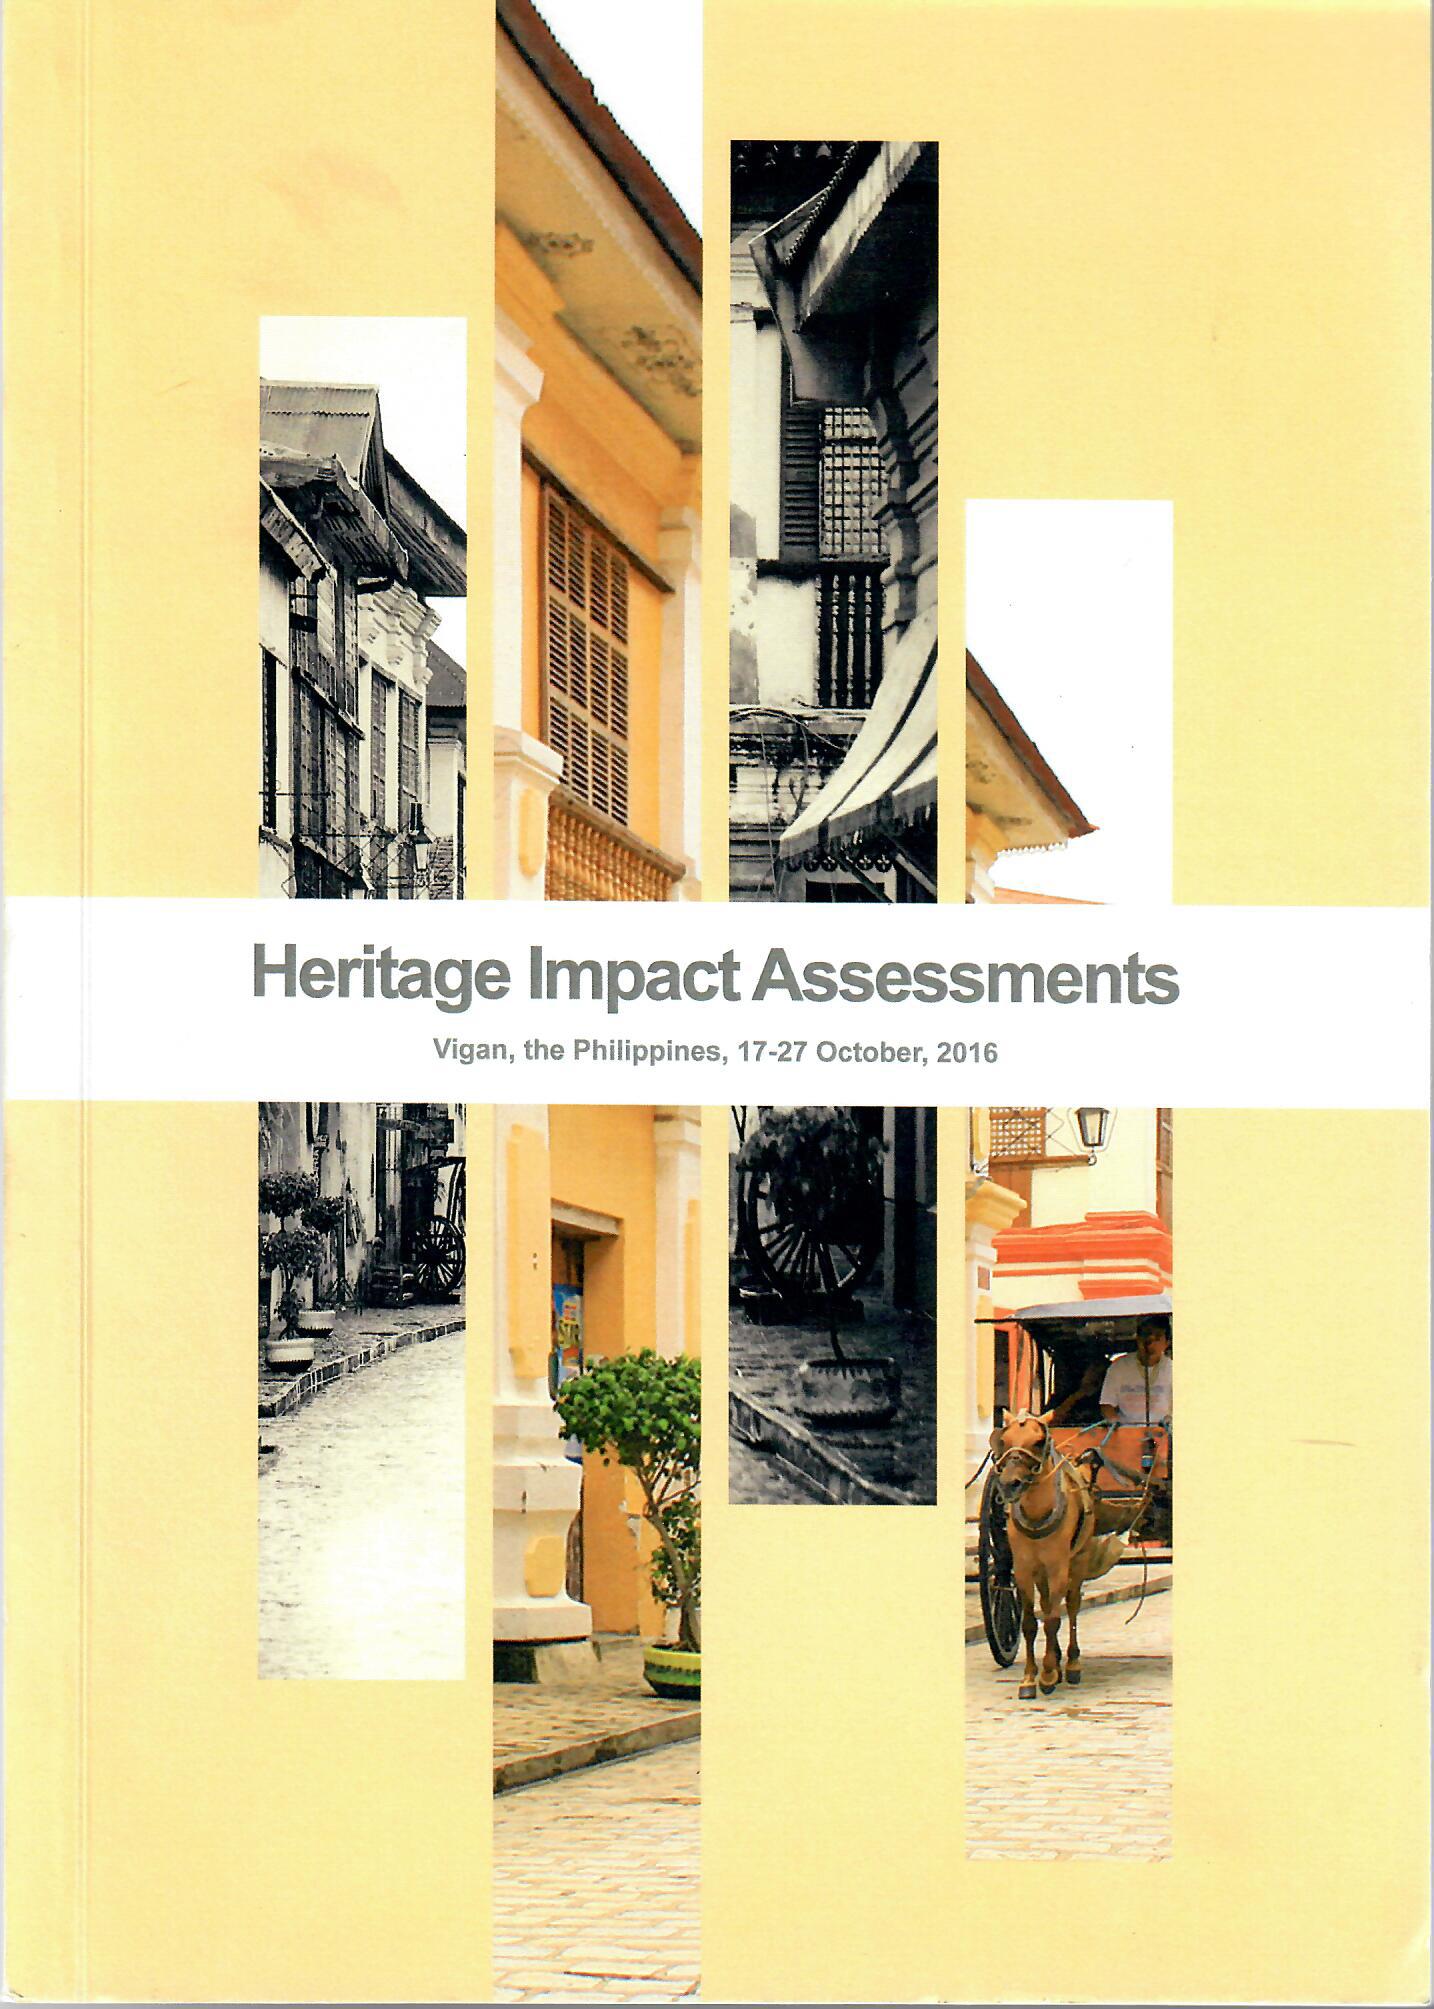 Heritage Impact Assessments